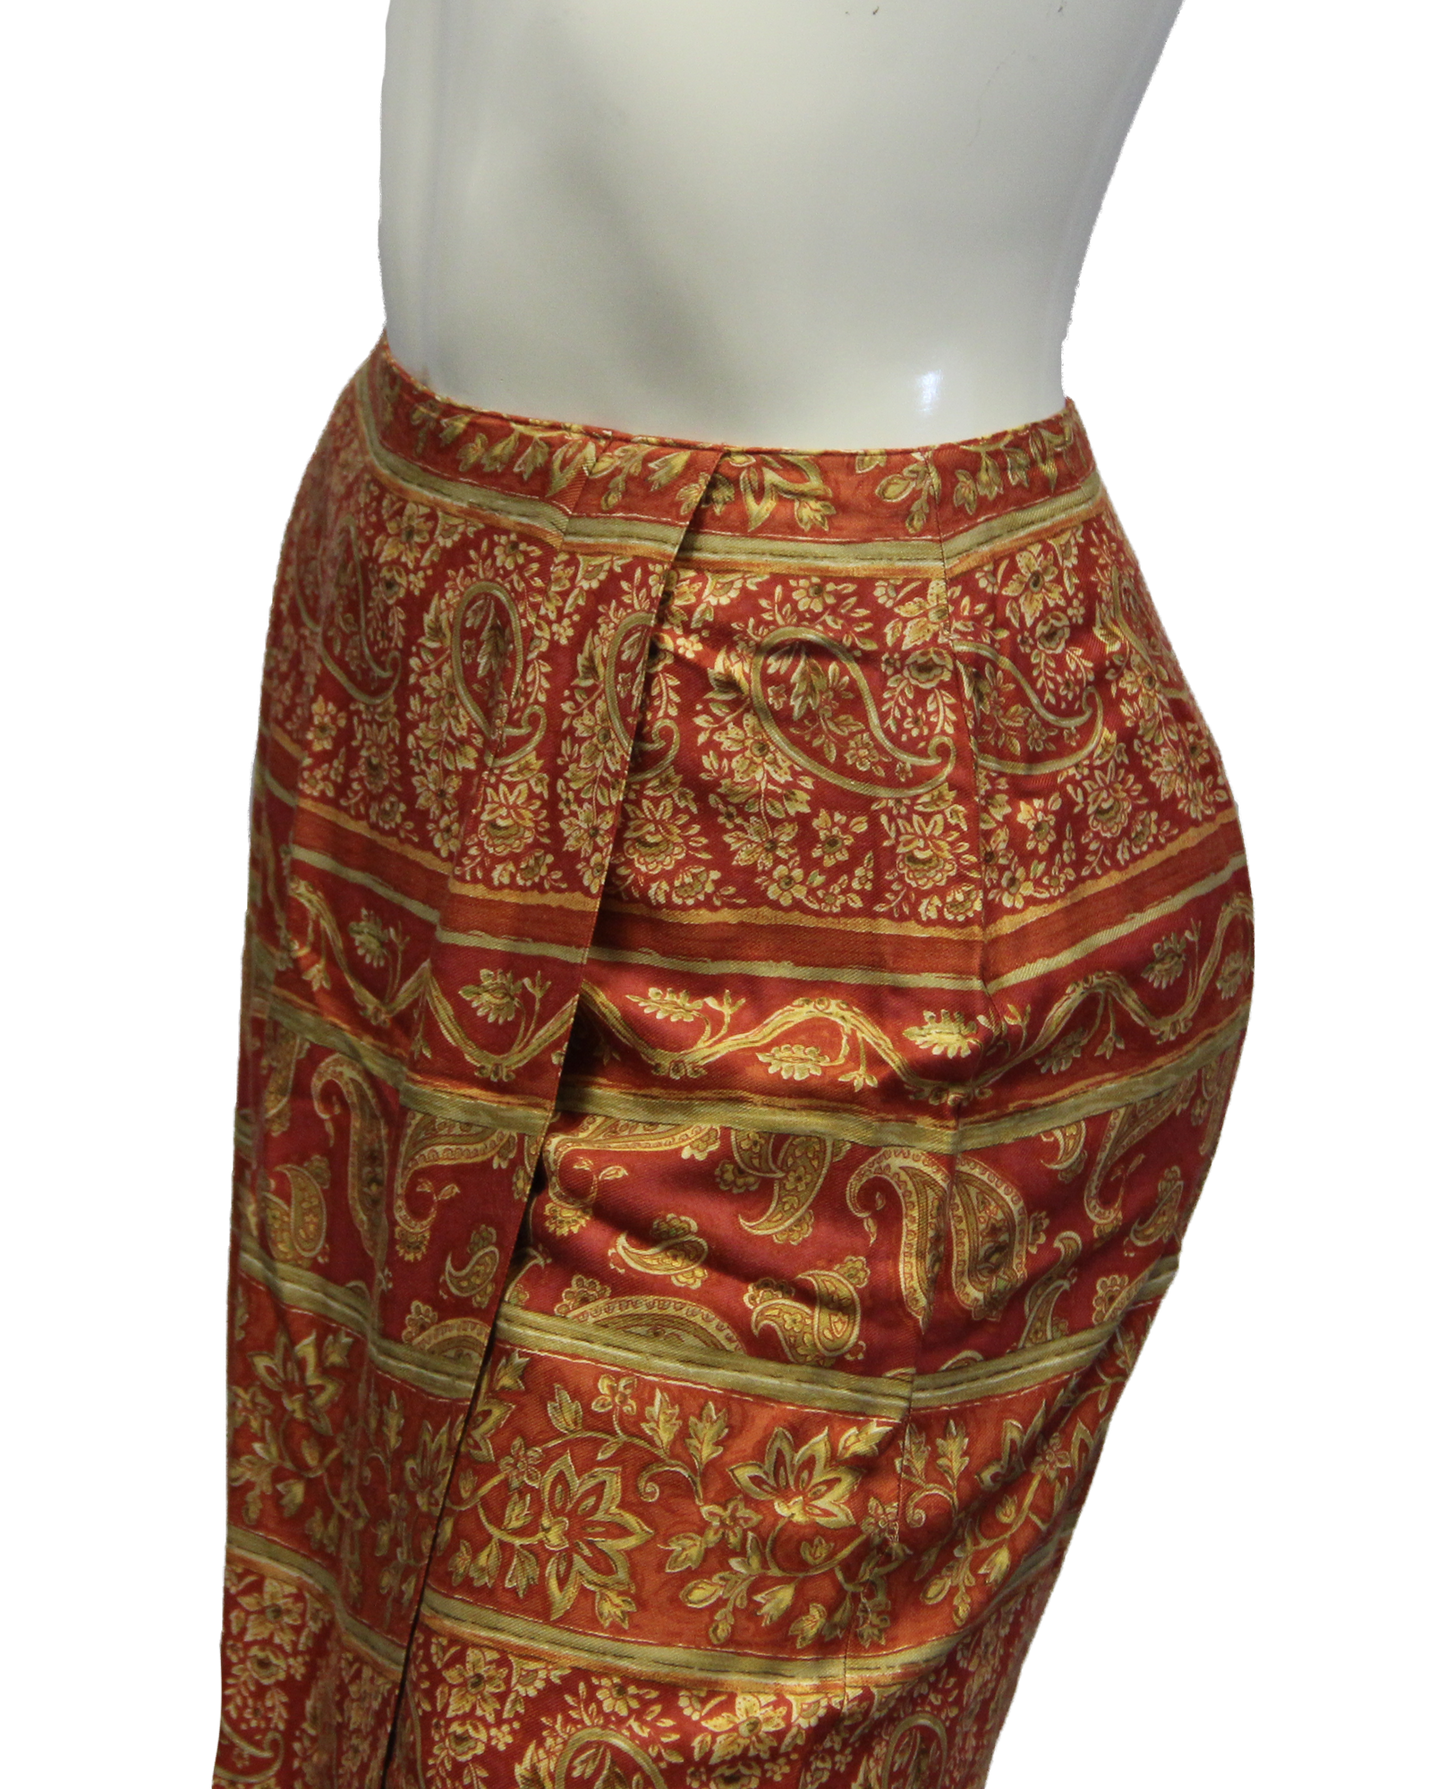 Load image into Gallery viewer, Talbots Wrap Around Skirt Size 4P (SKU 000028) - Designers On A Dime - 3
